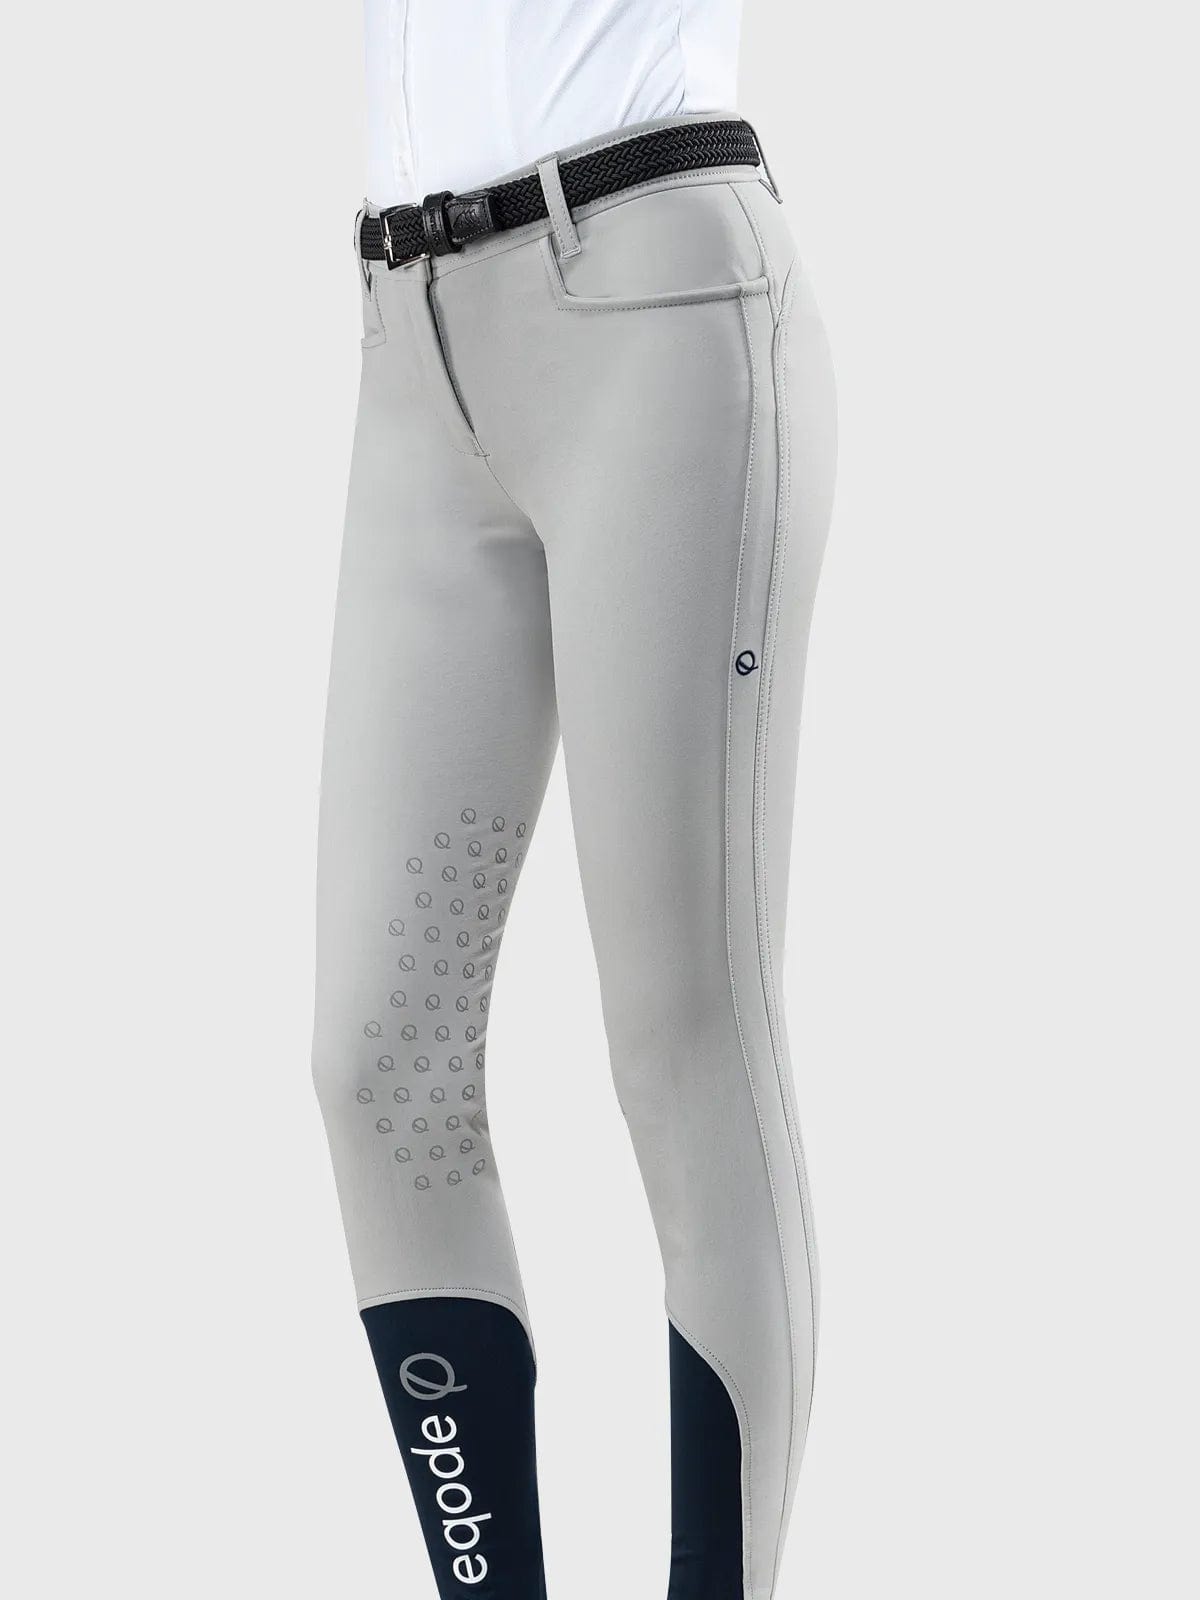 EQODE By Equiline Breeches EQODE WOMEN'S BREECHES WITH KNEE GRIP equestrian team apparel online tack store mobile tack store custom farm apparel custom show stable clothing equestrian lifestyle horse show clothing riding clothes horses equestrian tack store